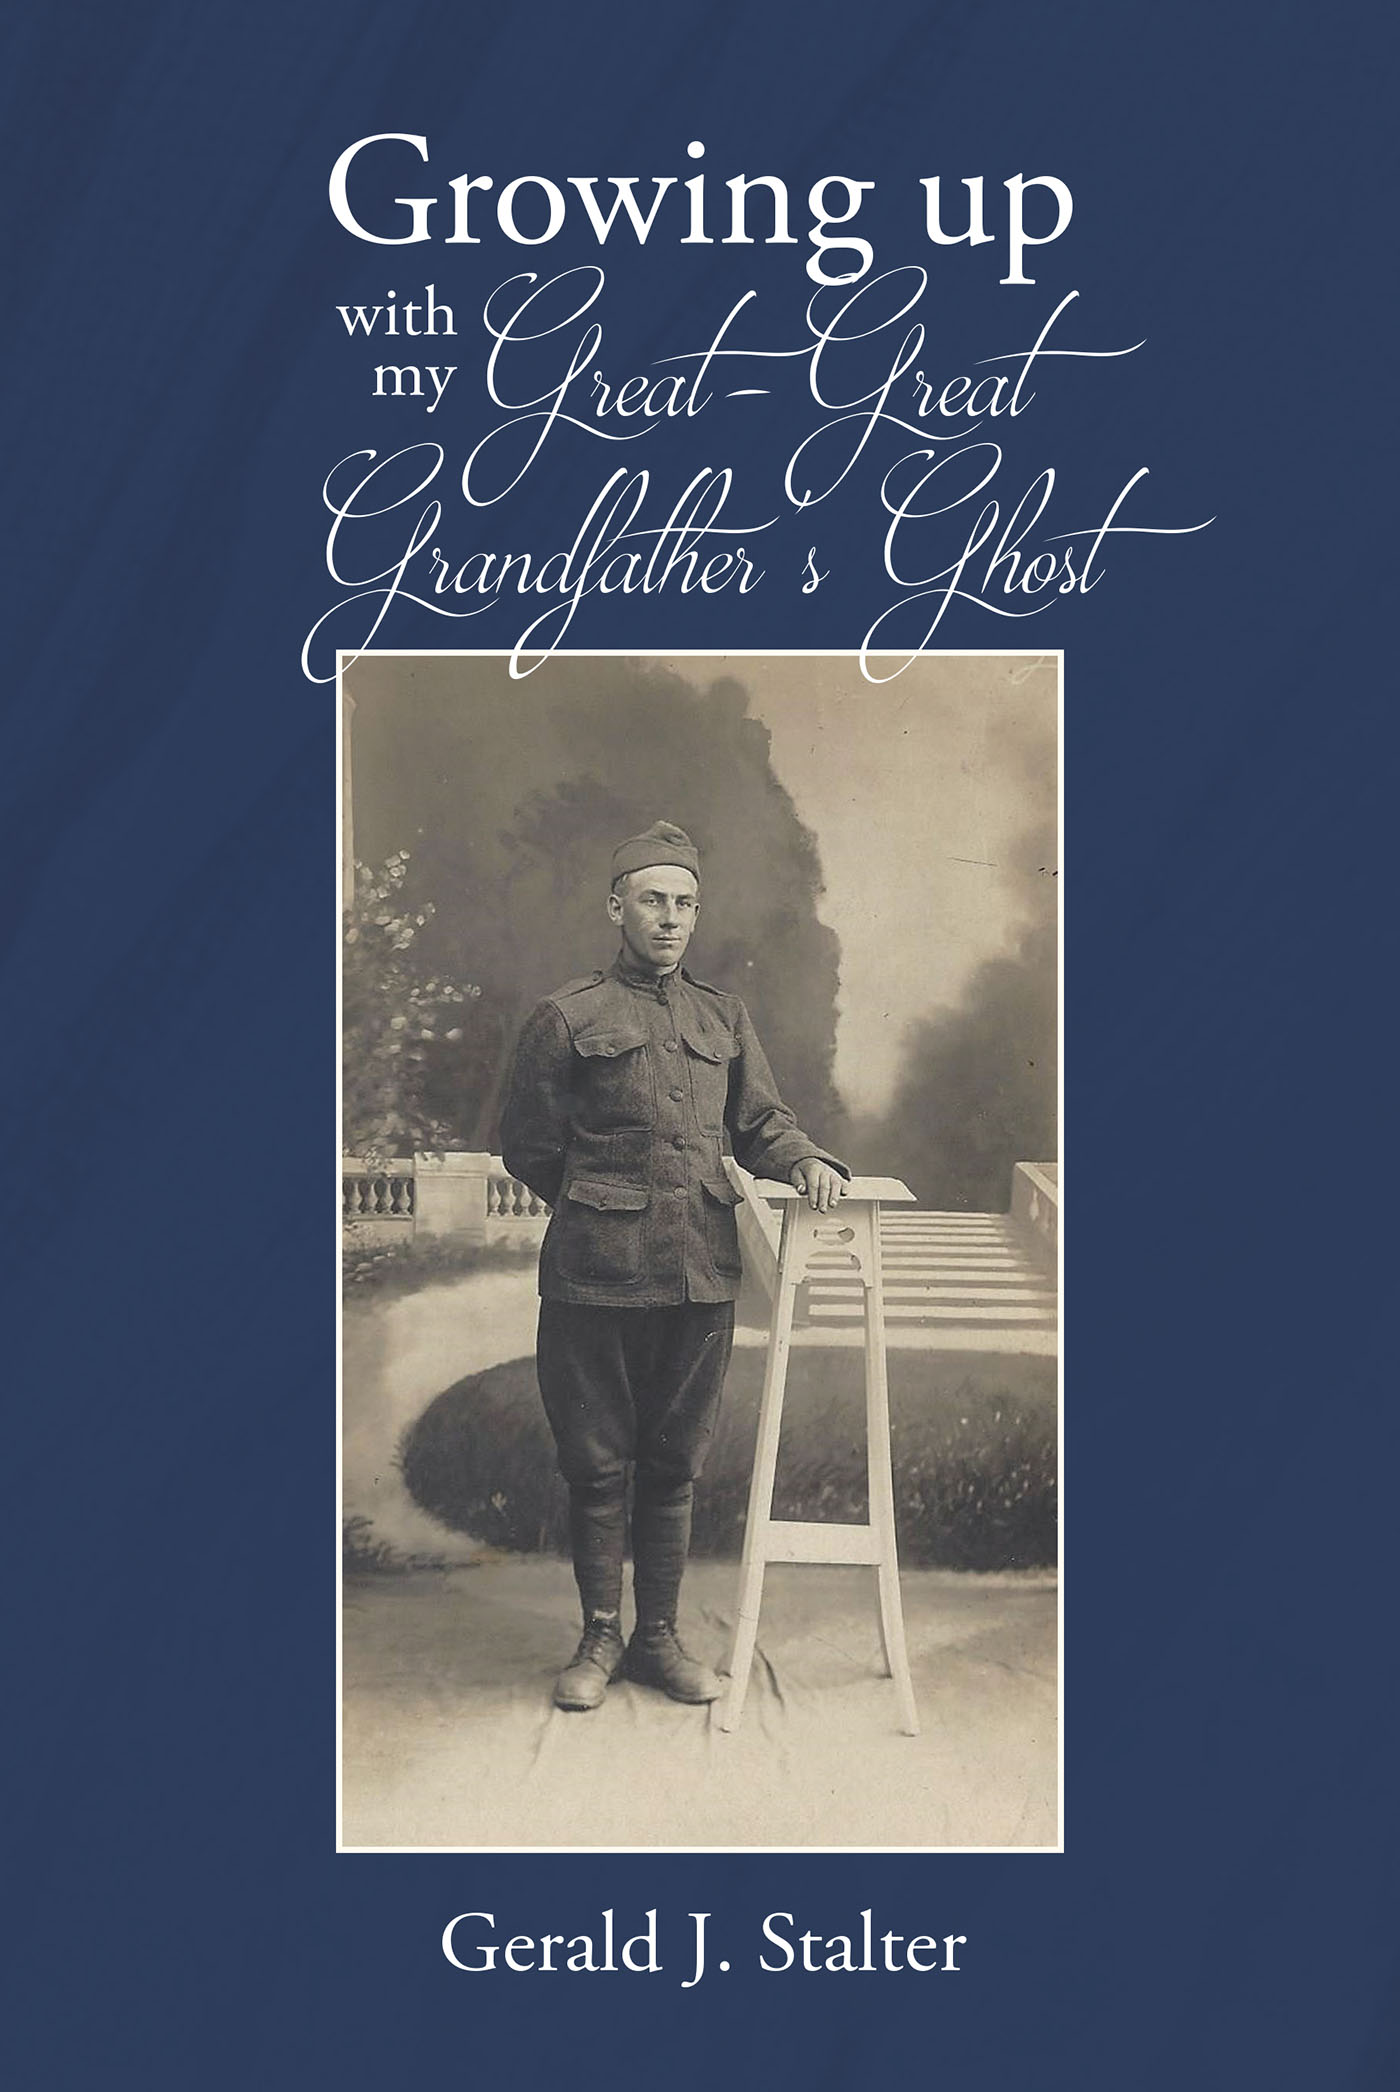 Growing up with my Great-Great Grandfather's ghost Cover Image